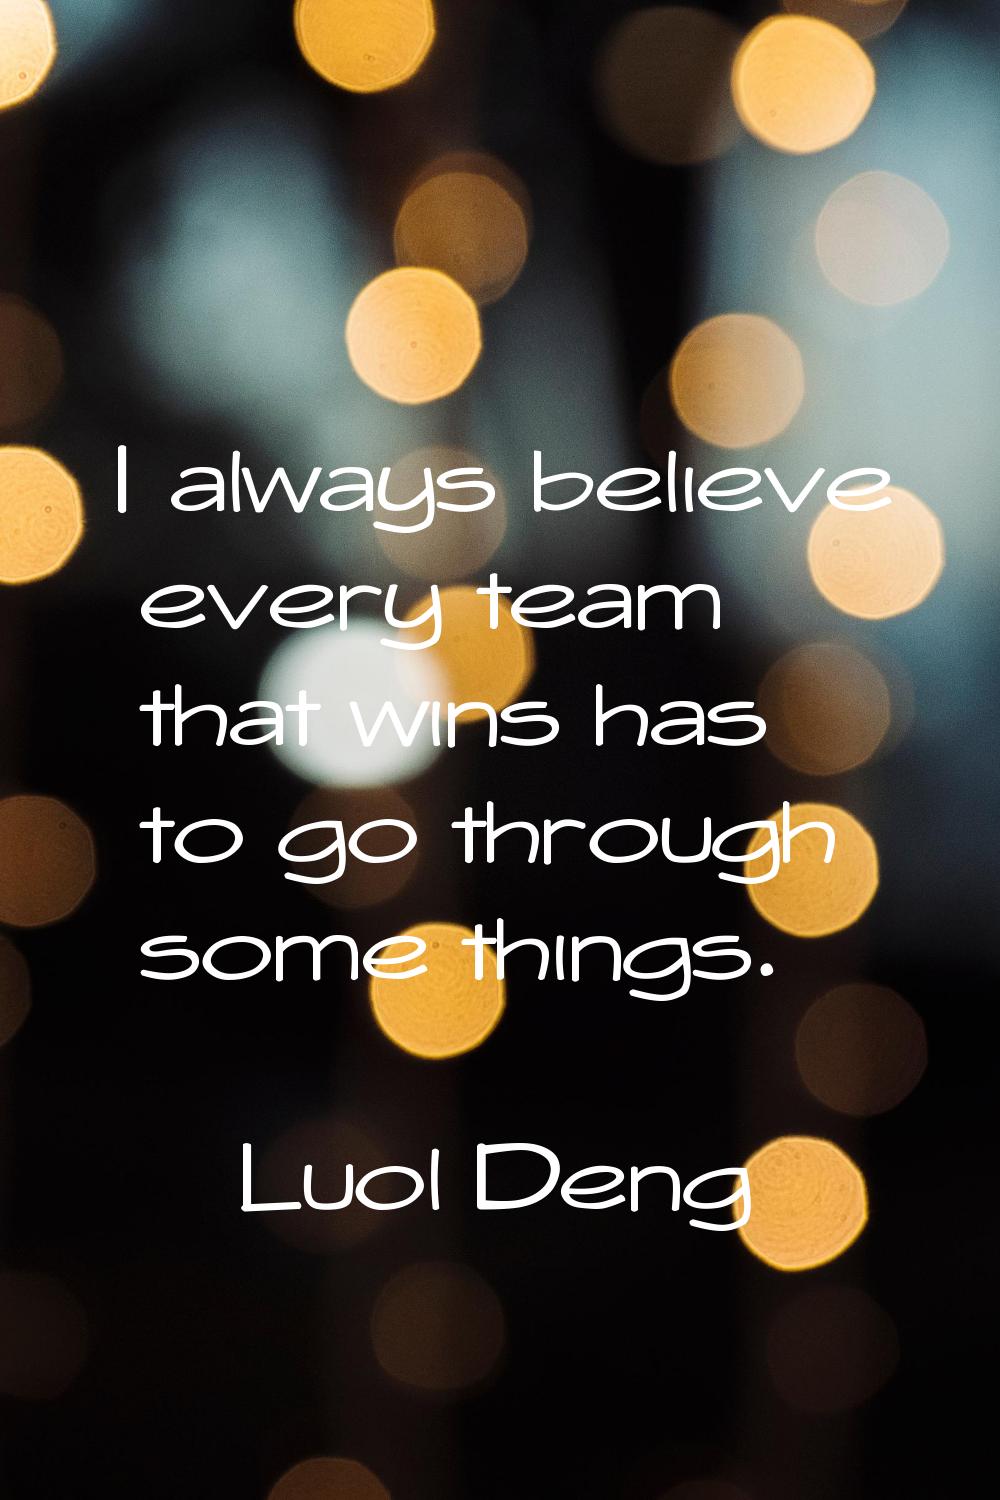 I always believe every team that wins has to go through some things.